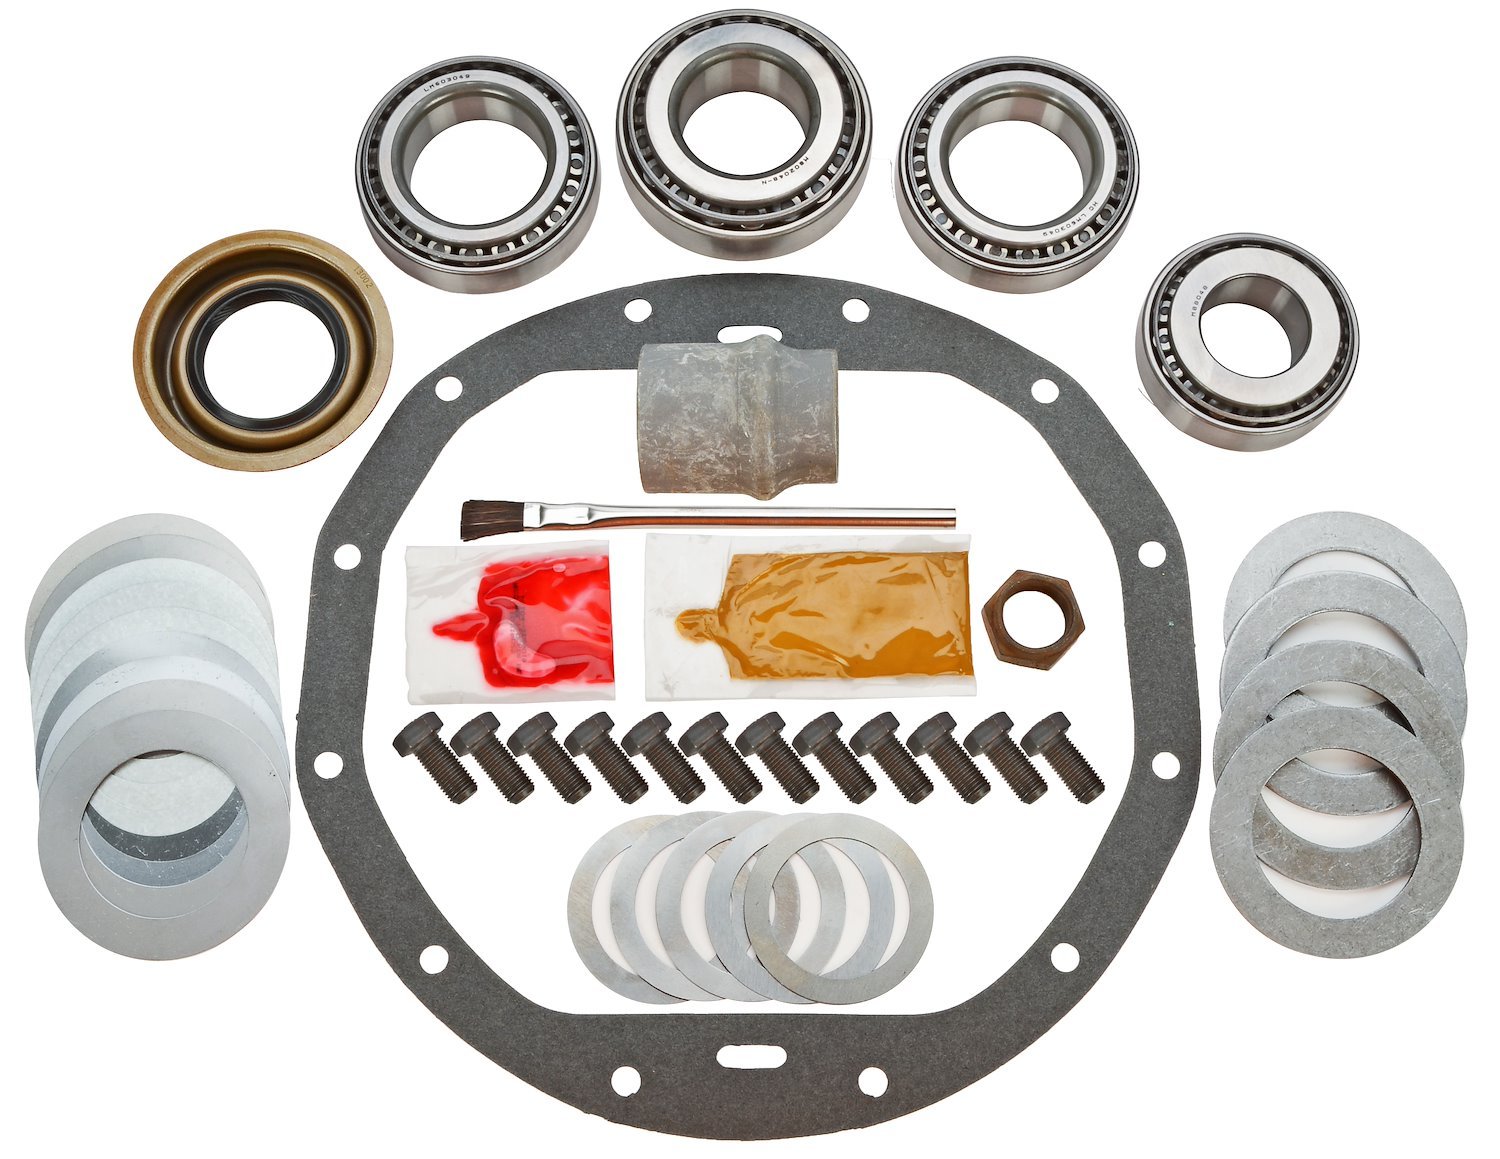 Complete Differential Installation Kit for GM 8.875 in. (12-Bolt) Car